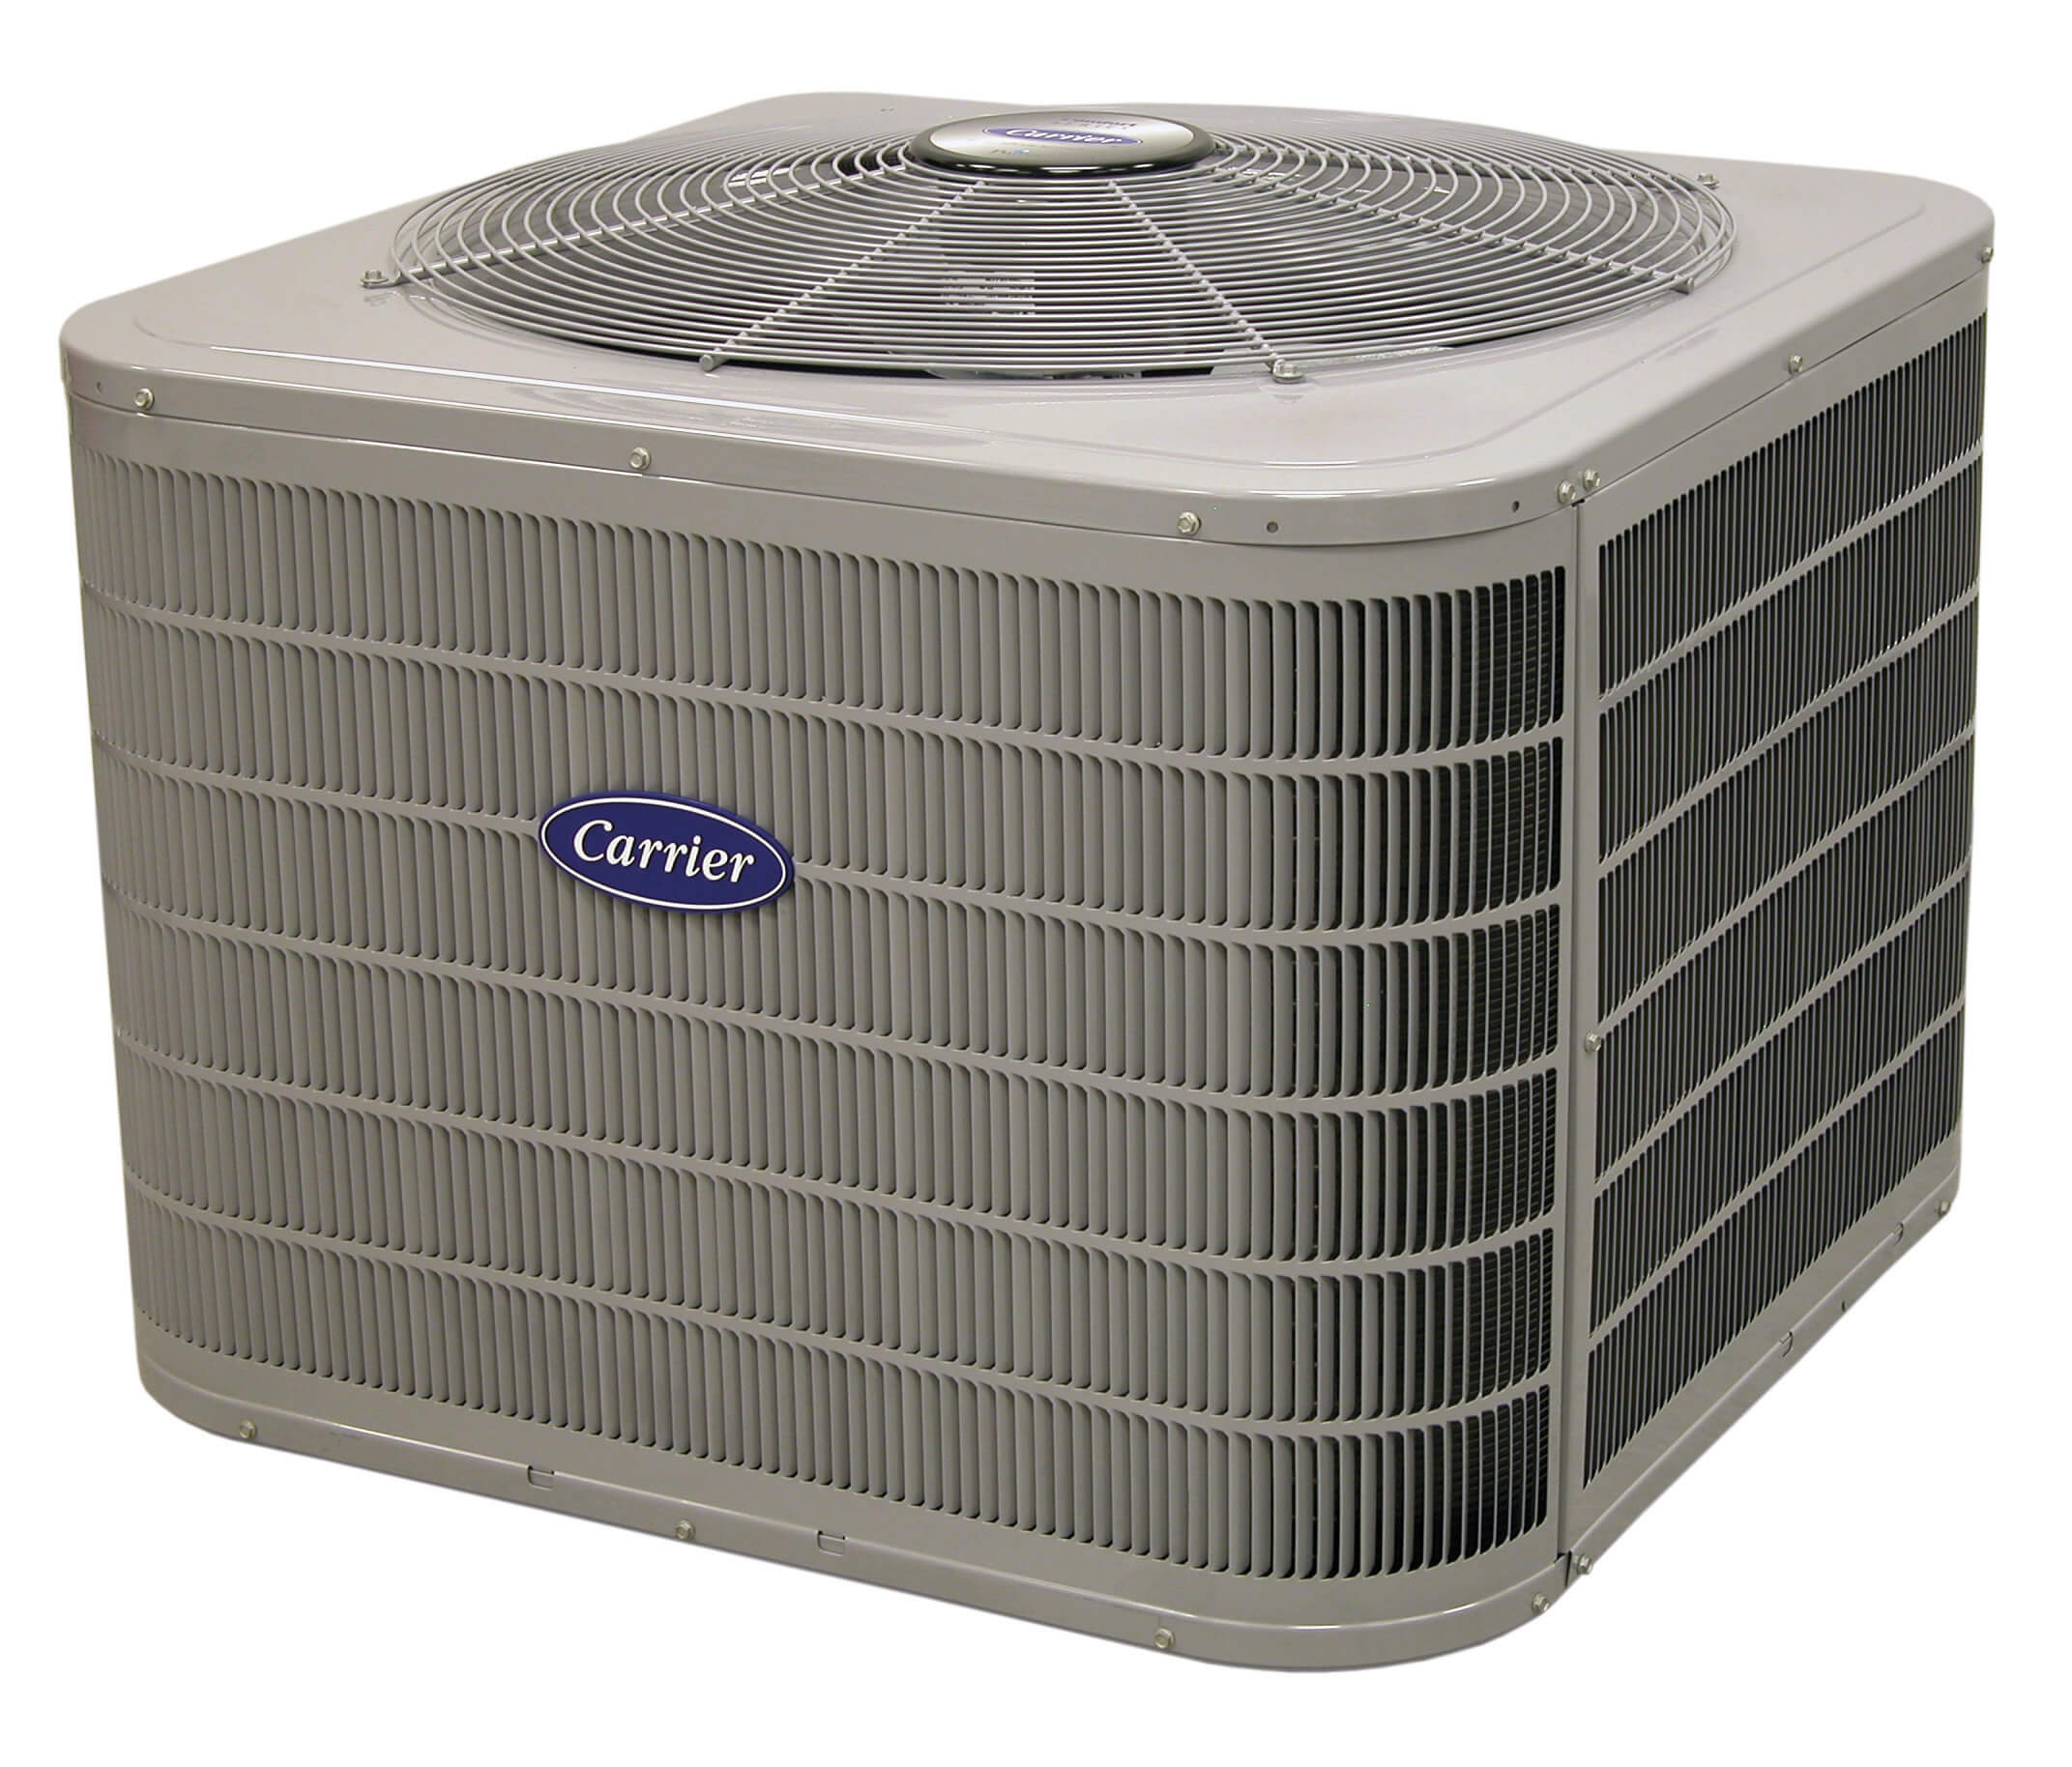 Carrier air conditioning unit from Degree Heating and Cooling. 